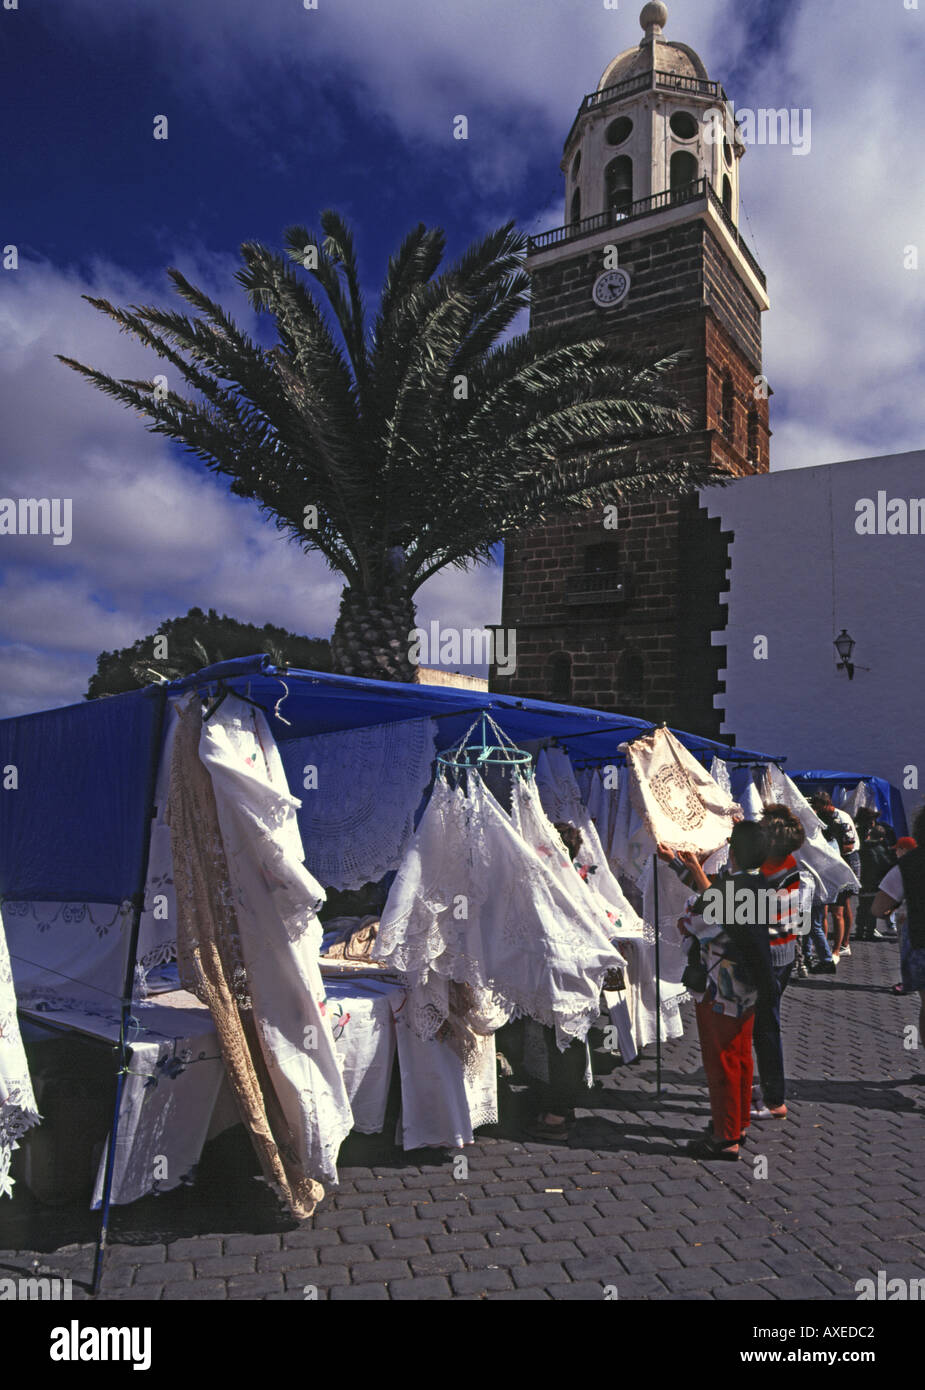 dh  TEGUISE LANZAROTE Sunday market  lace stall and church clock tower bazaar Stock Photo